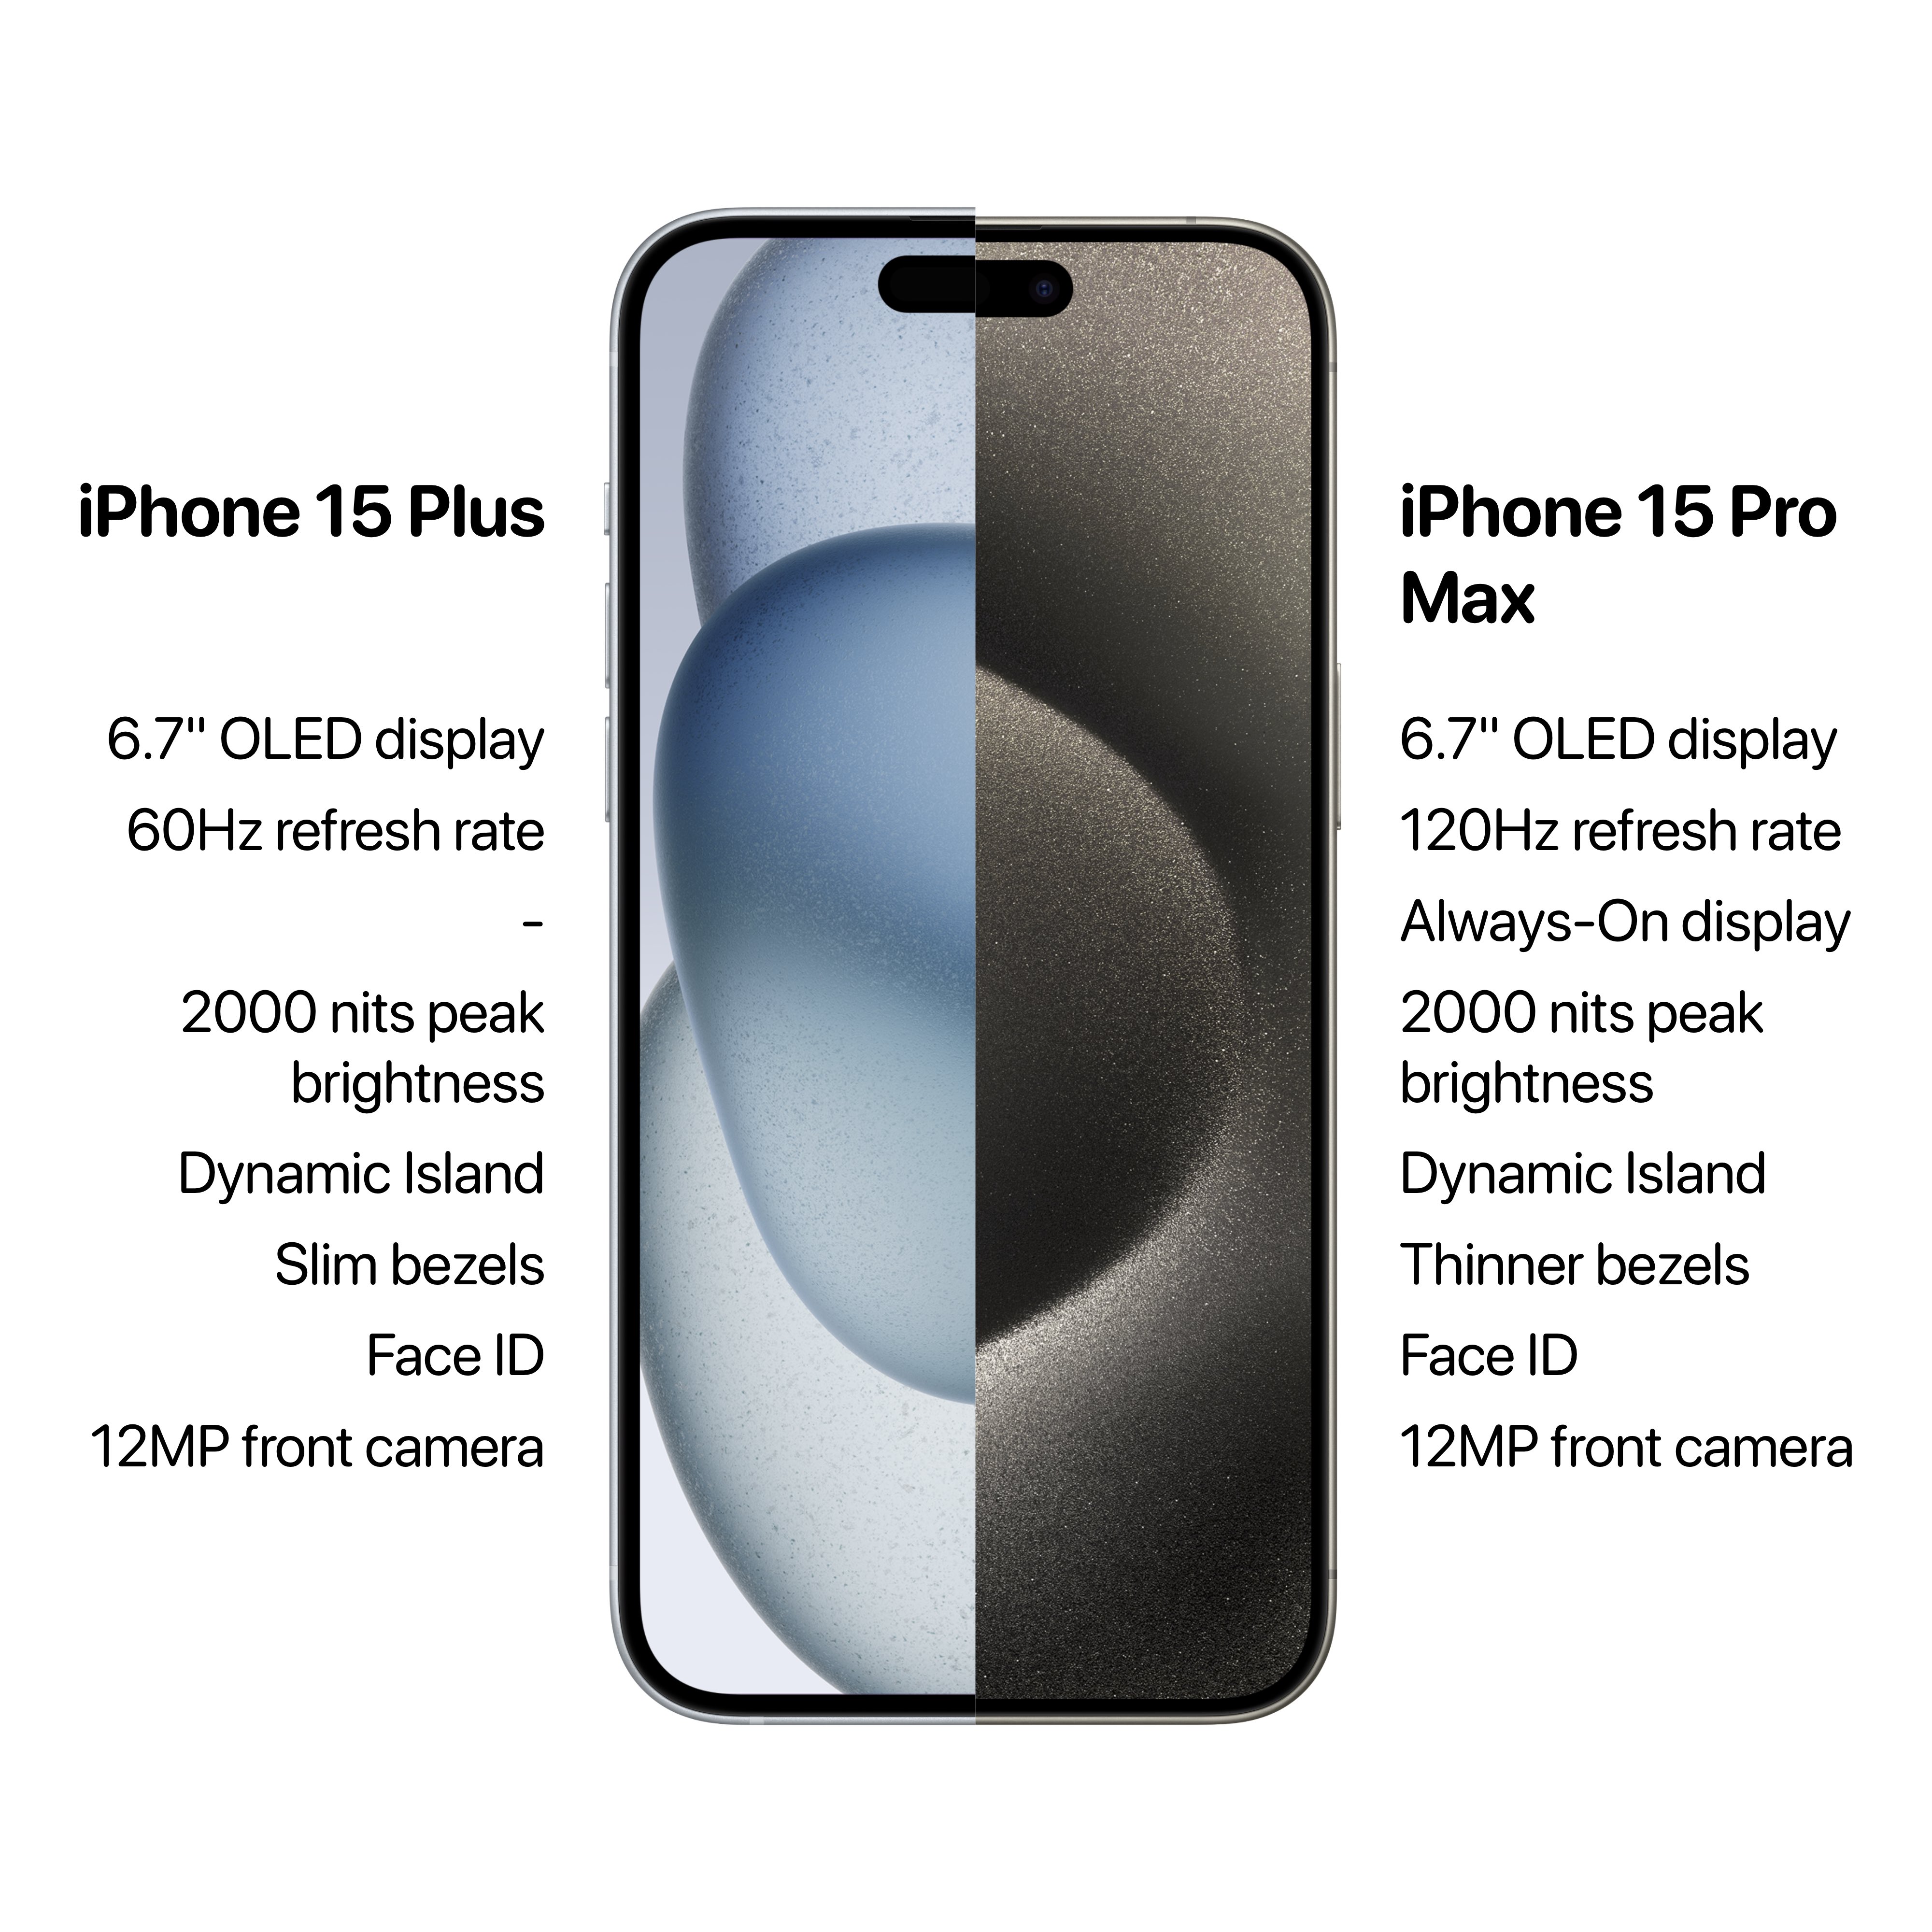 iPhone 15 Plus vs iPhone 15 Pro Max: How do they compare?